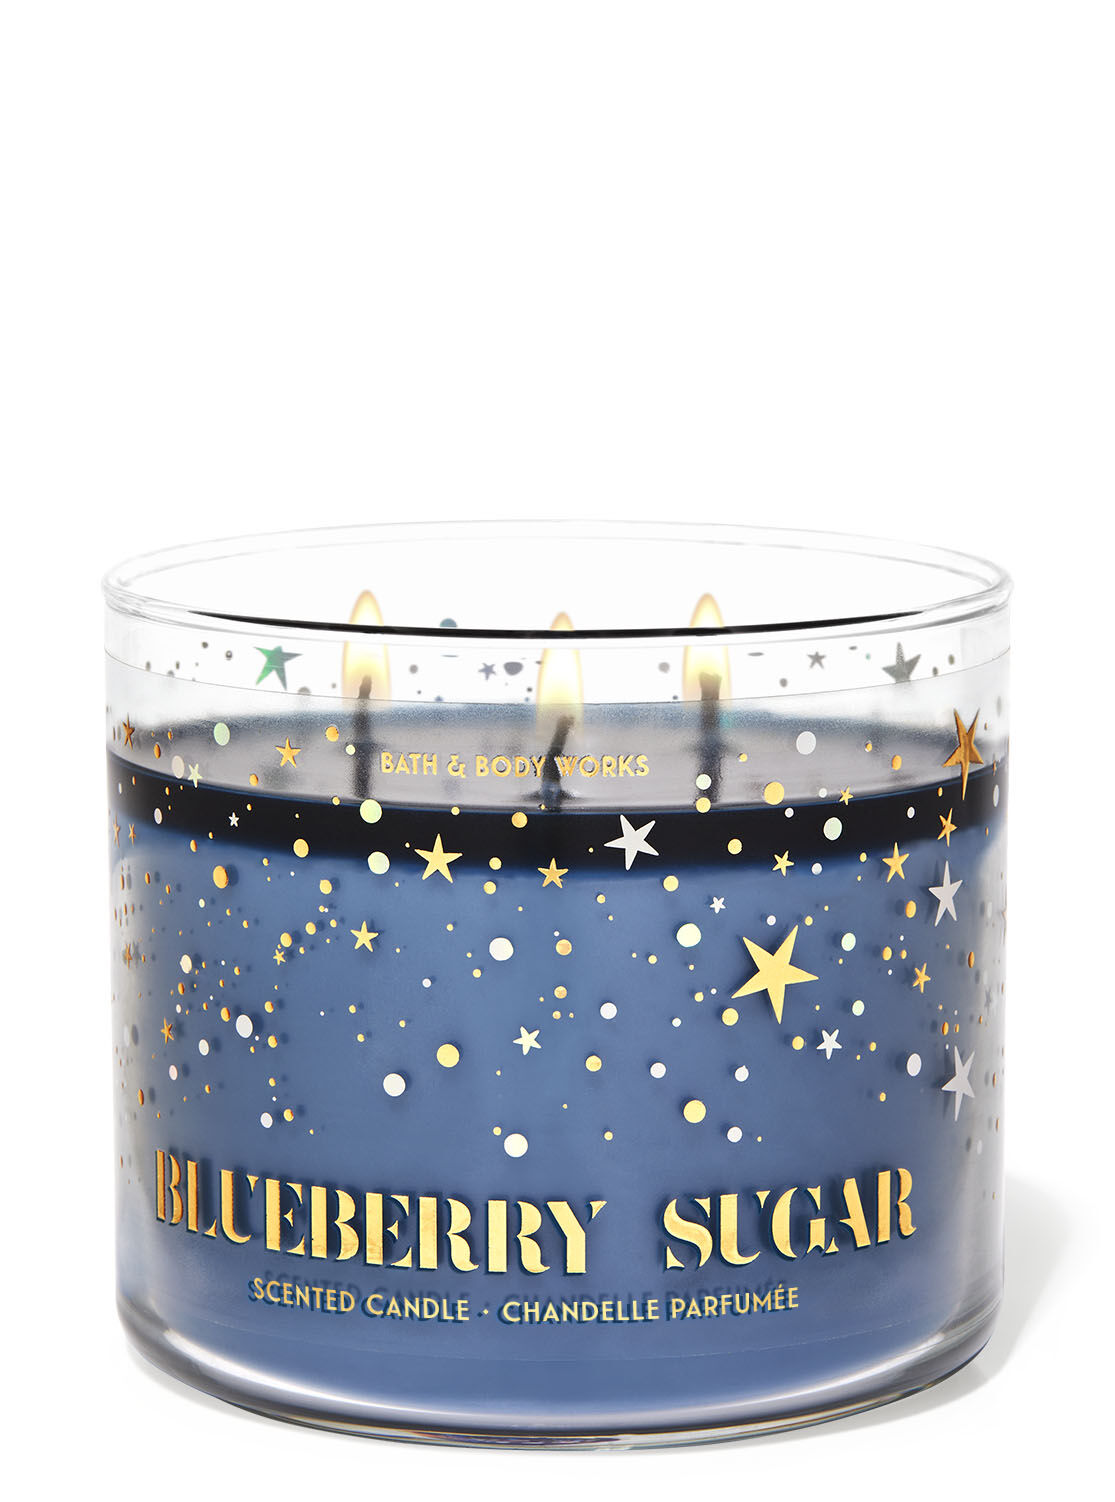 BATH & BODY WORKS BLUEBERRY SUGAR 14.5 oz 3 WICK SCENTED CANDLE 